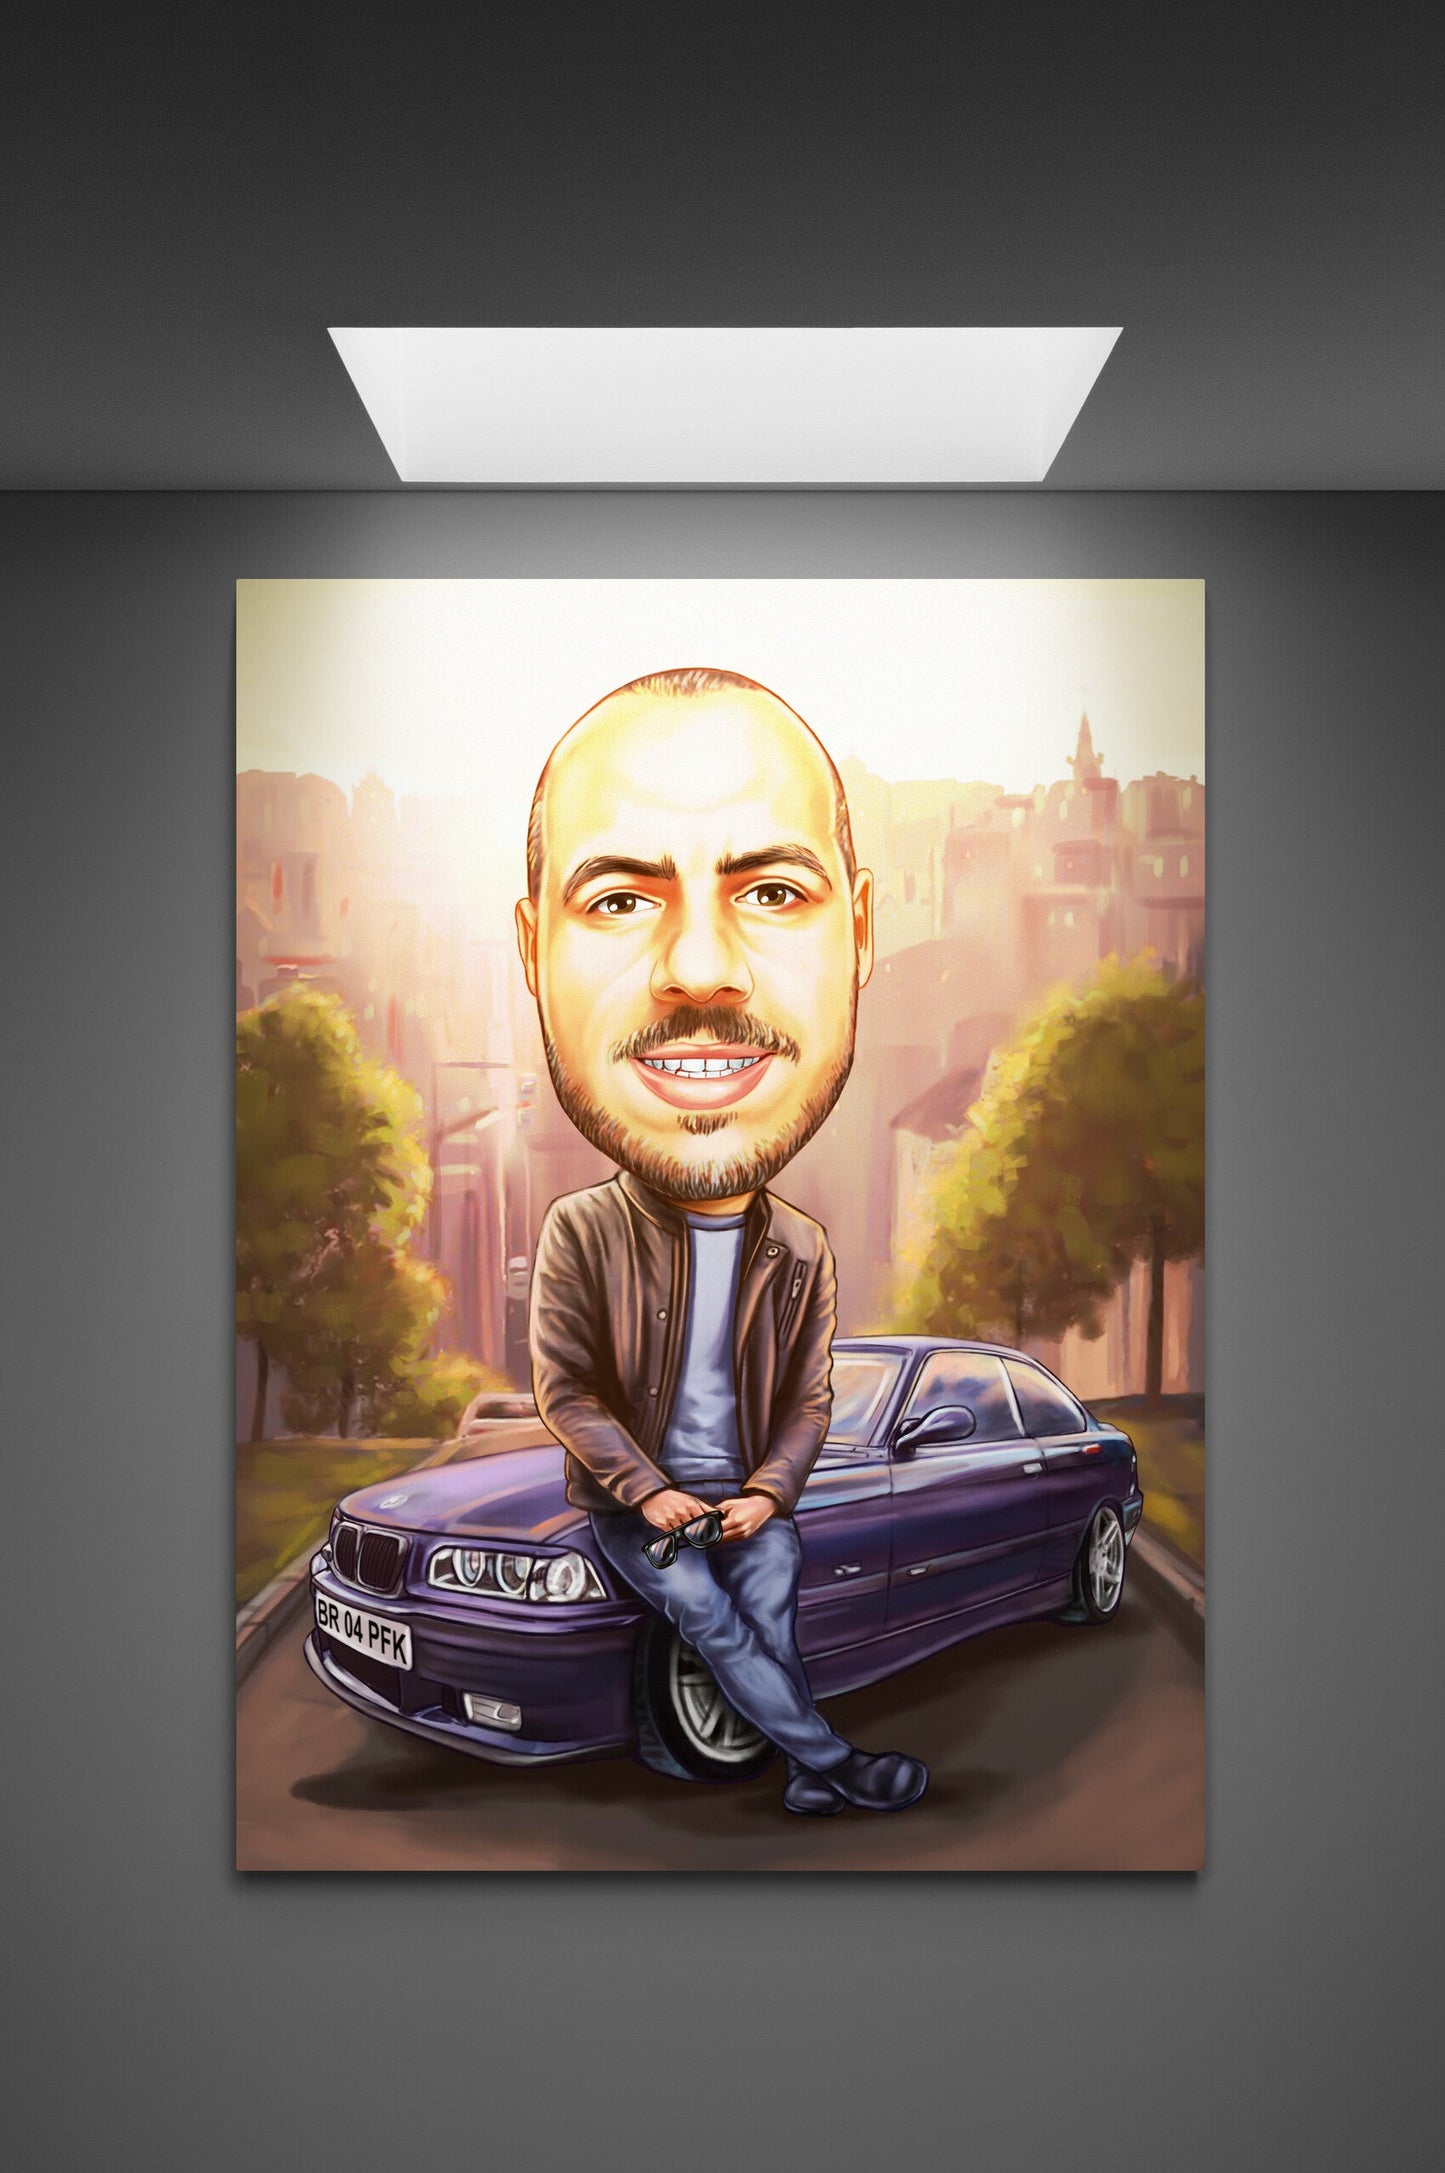 Old BMW caricature